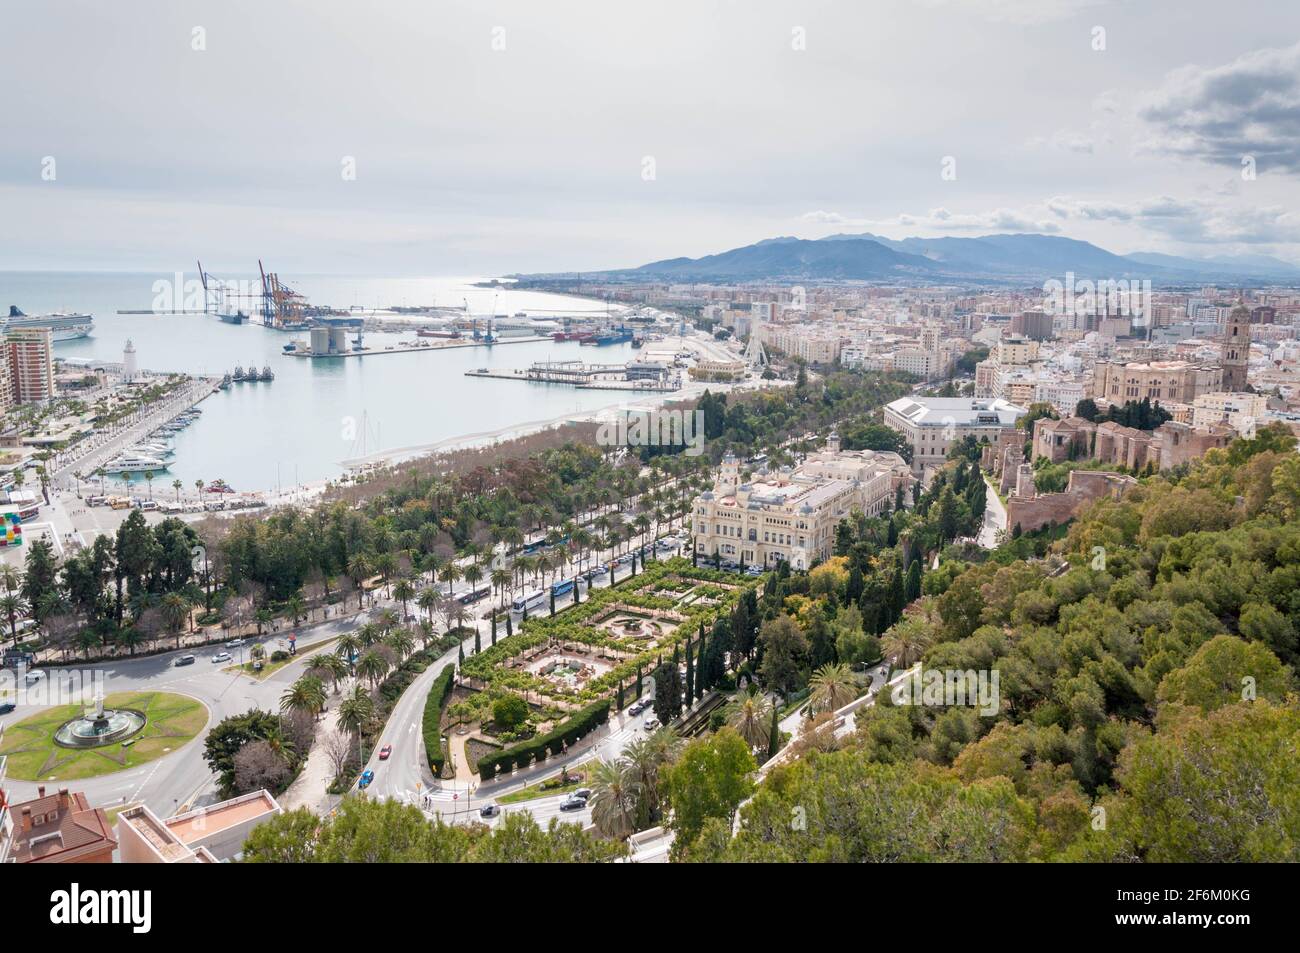 Jardines de Pedro Luis Alonso and the Port in Malaga, Spain Stock Photo